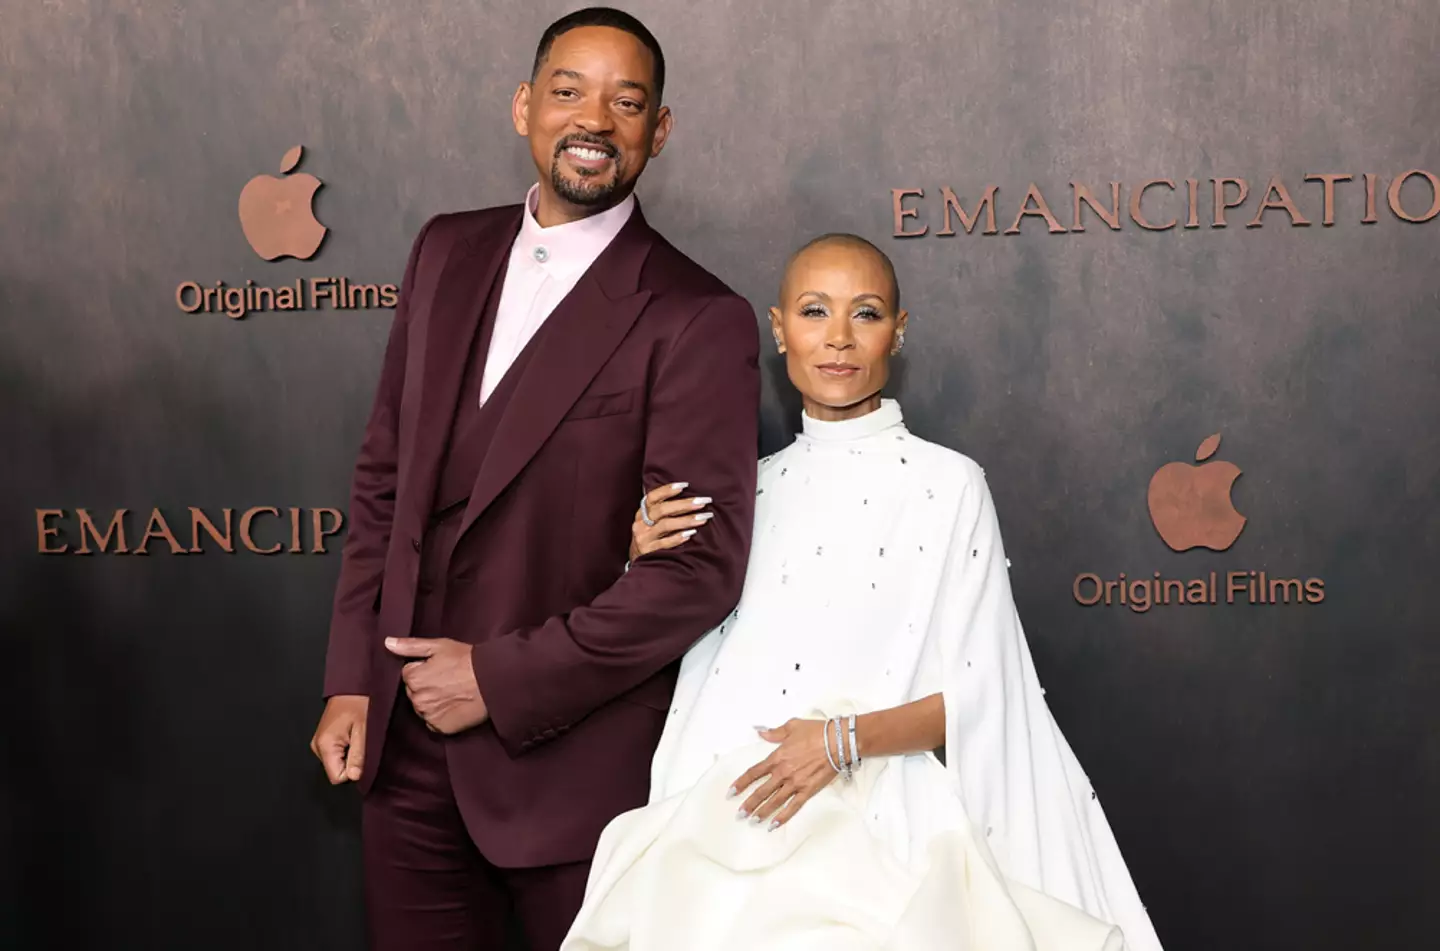 Jada Pinkett Smith claims she and Will Smith have been separated for seven years.